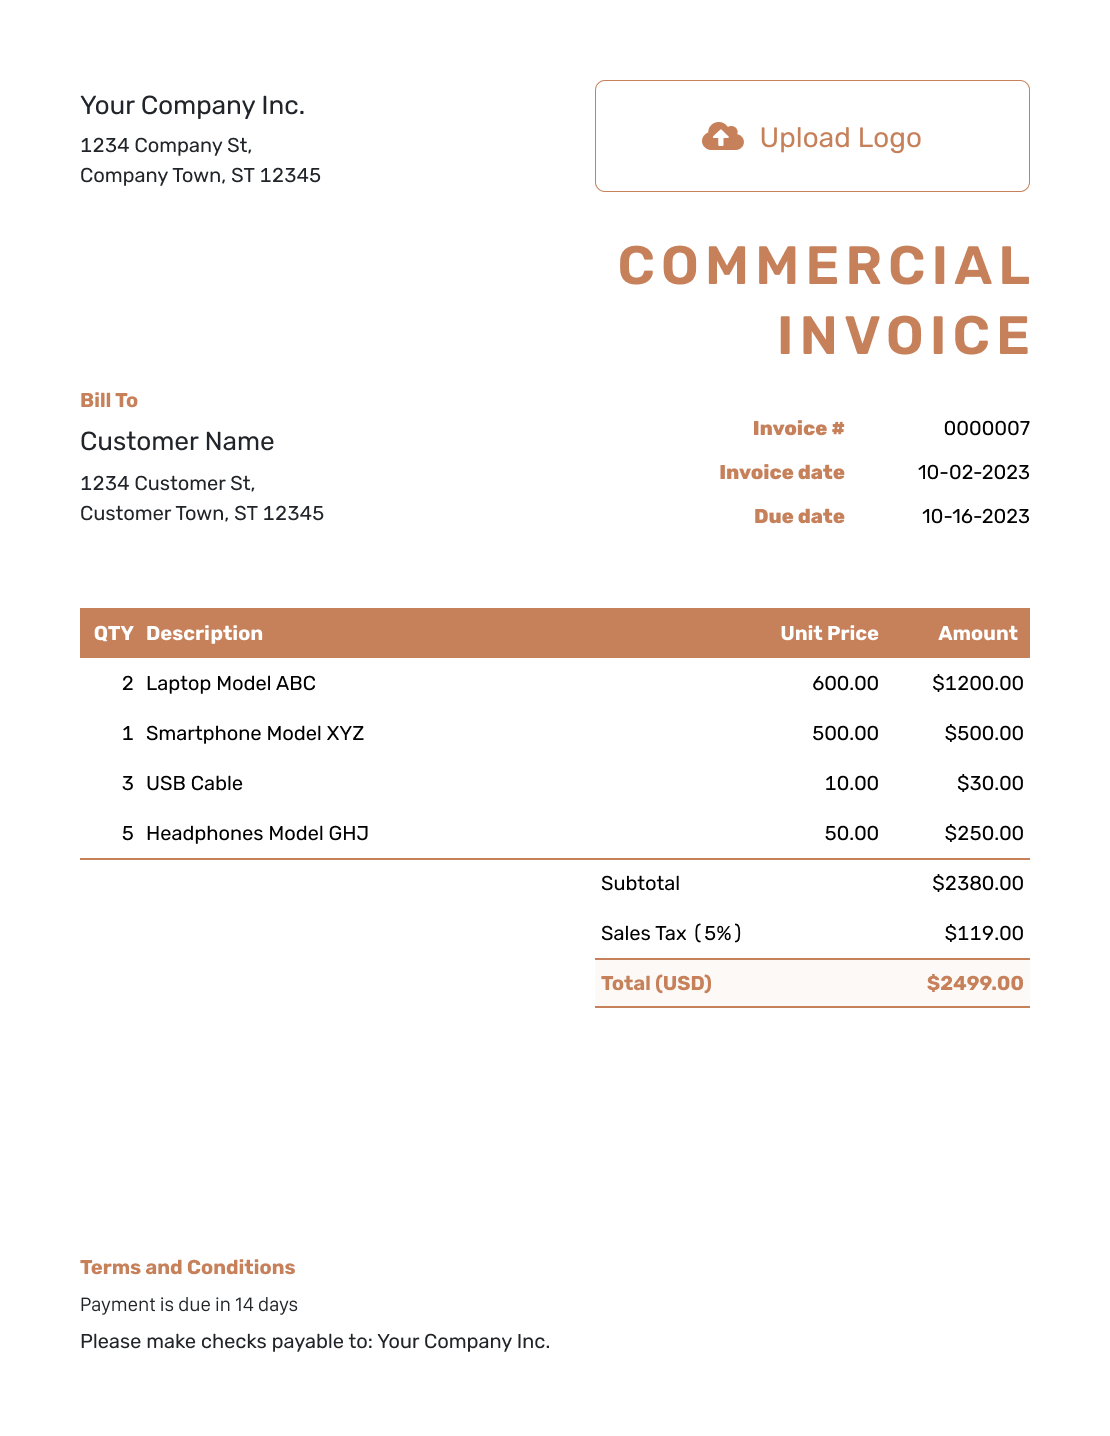 Standard Commercial Invoice Template